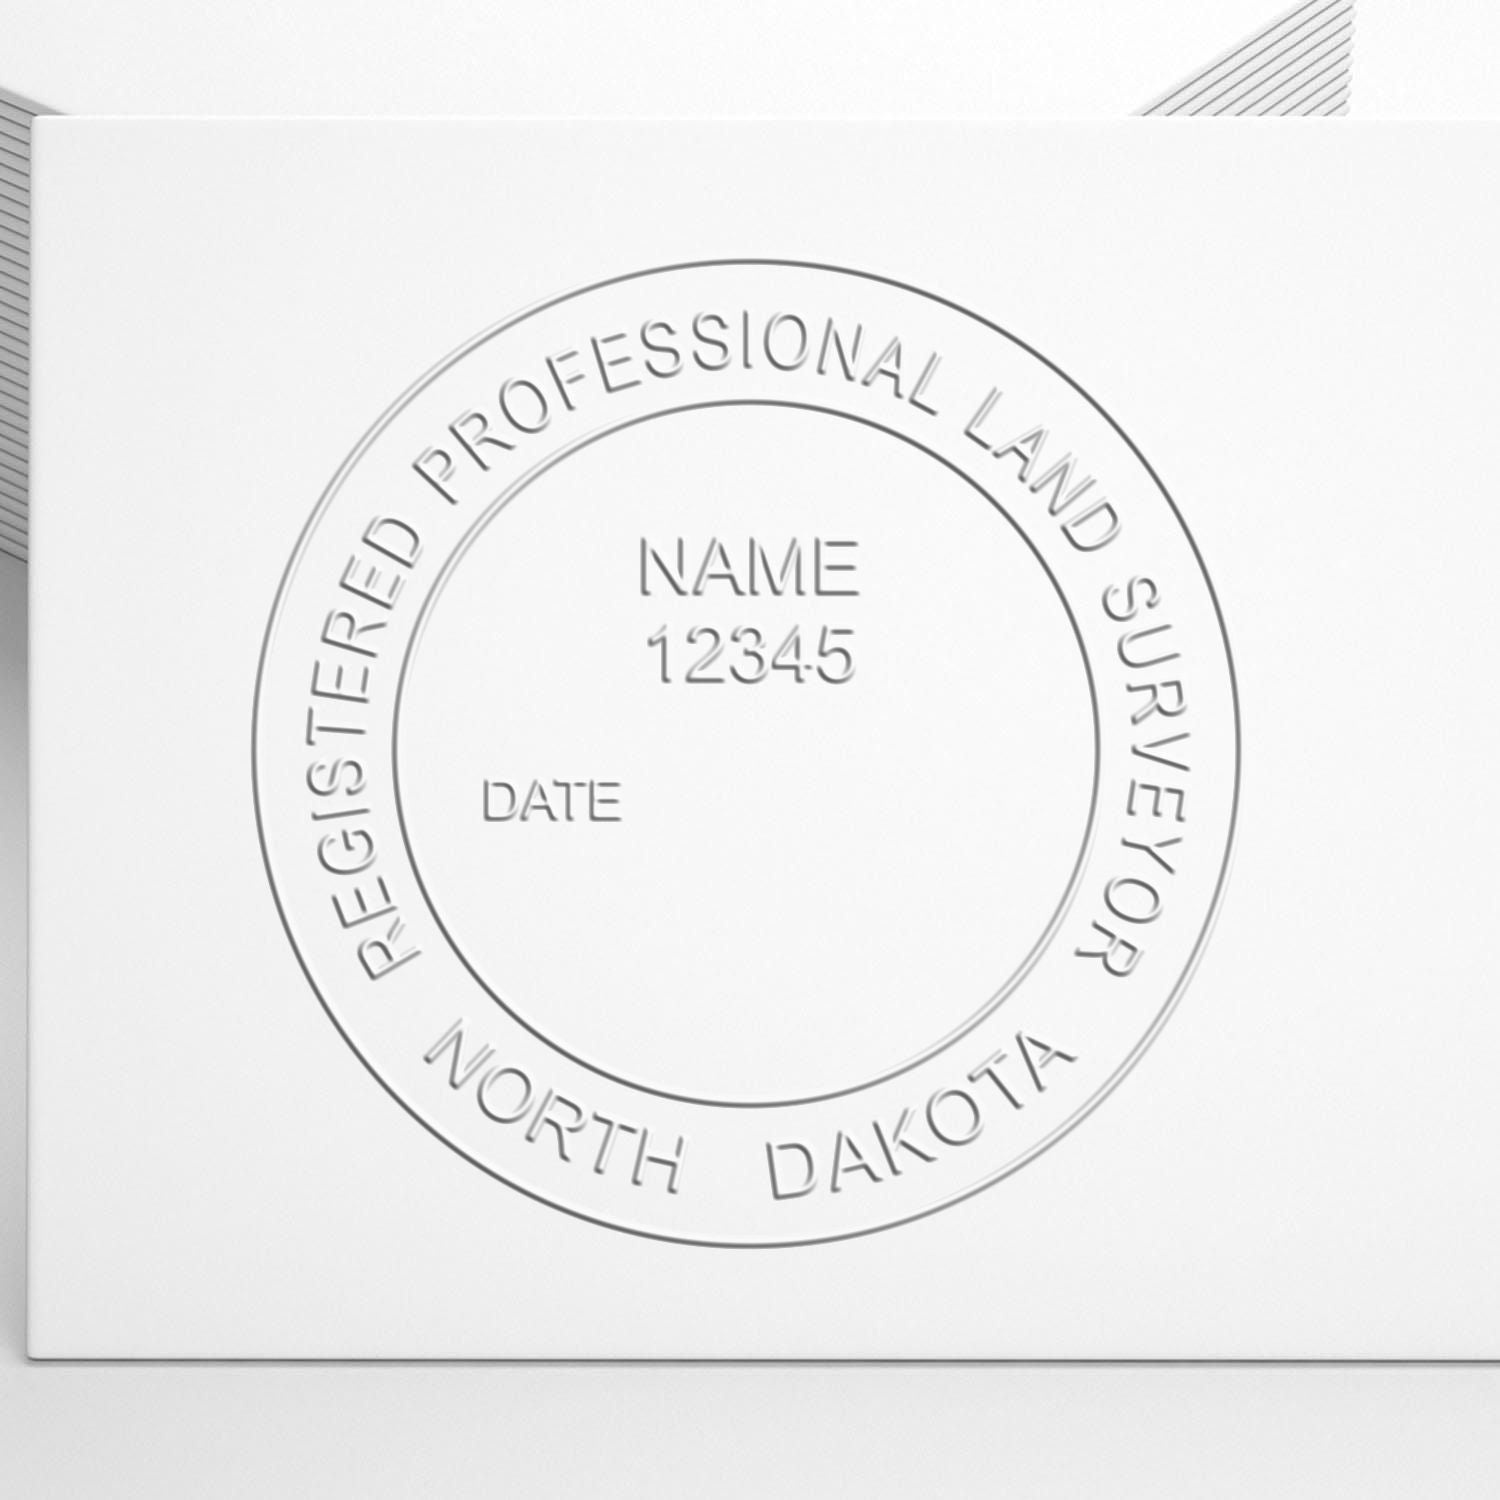 An alternative view of the Heavy Duty Cast Iron North Dakota Land Surveyor Seal Embosser stamped on a sheet of paper showing the image in use